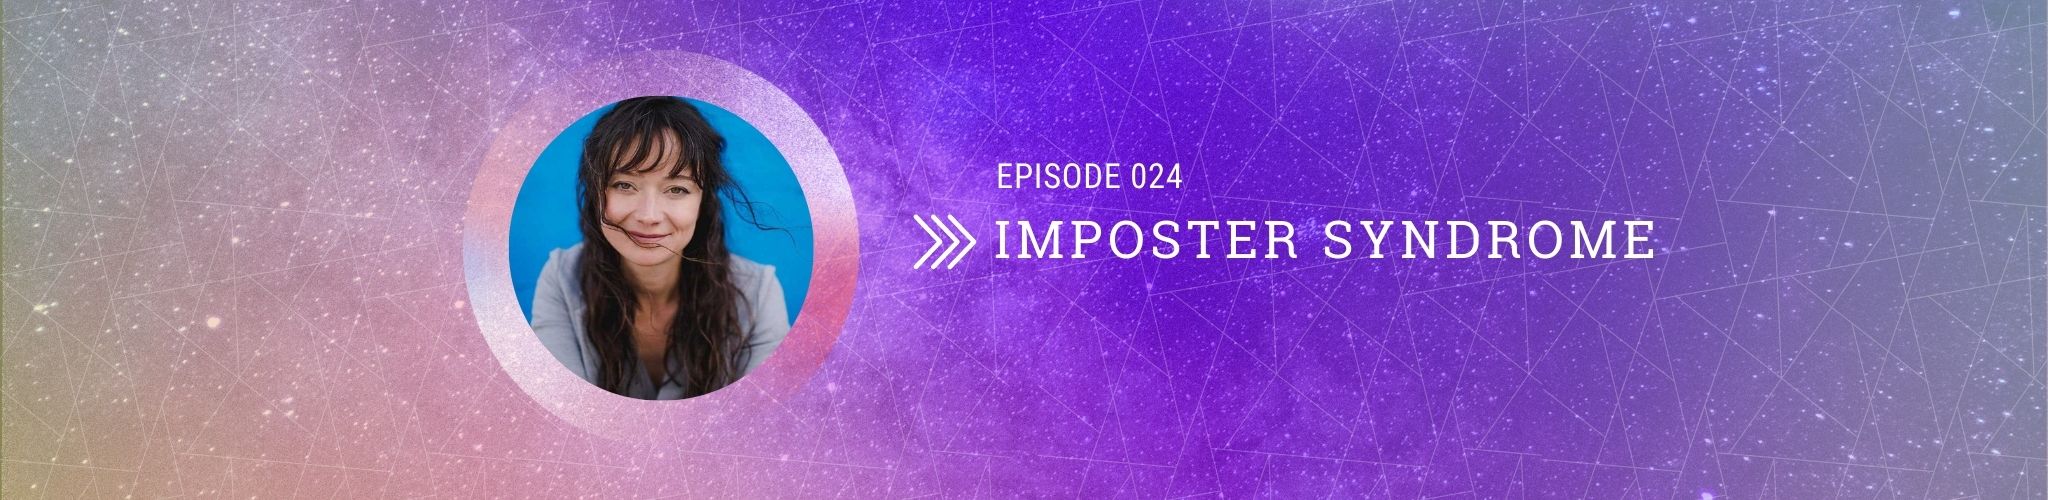 purple banner for imposter syndrome